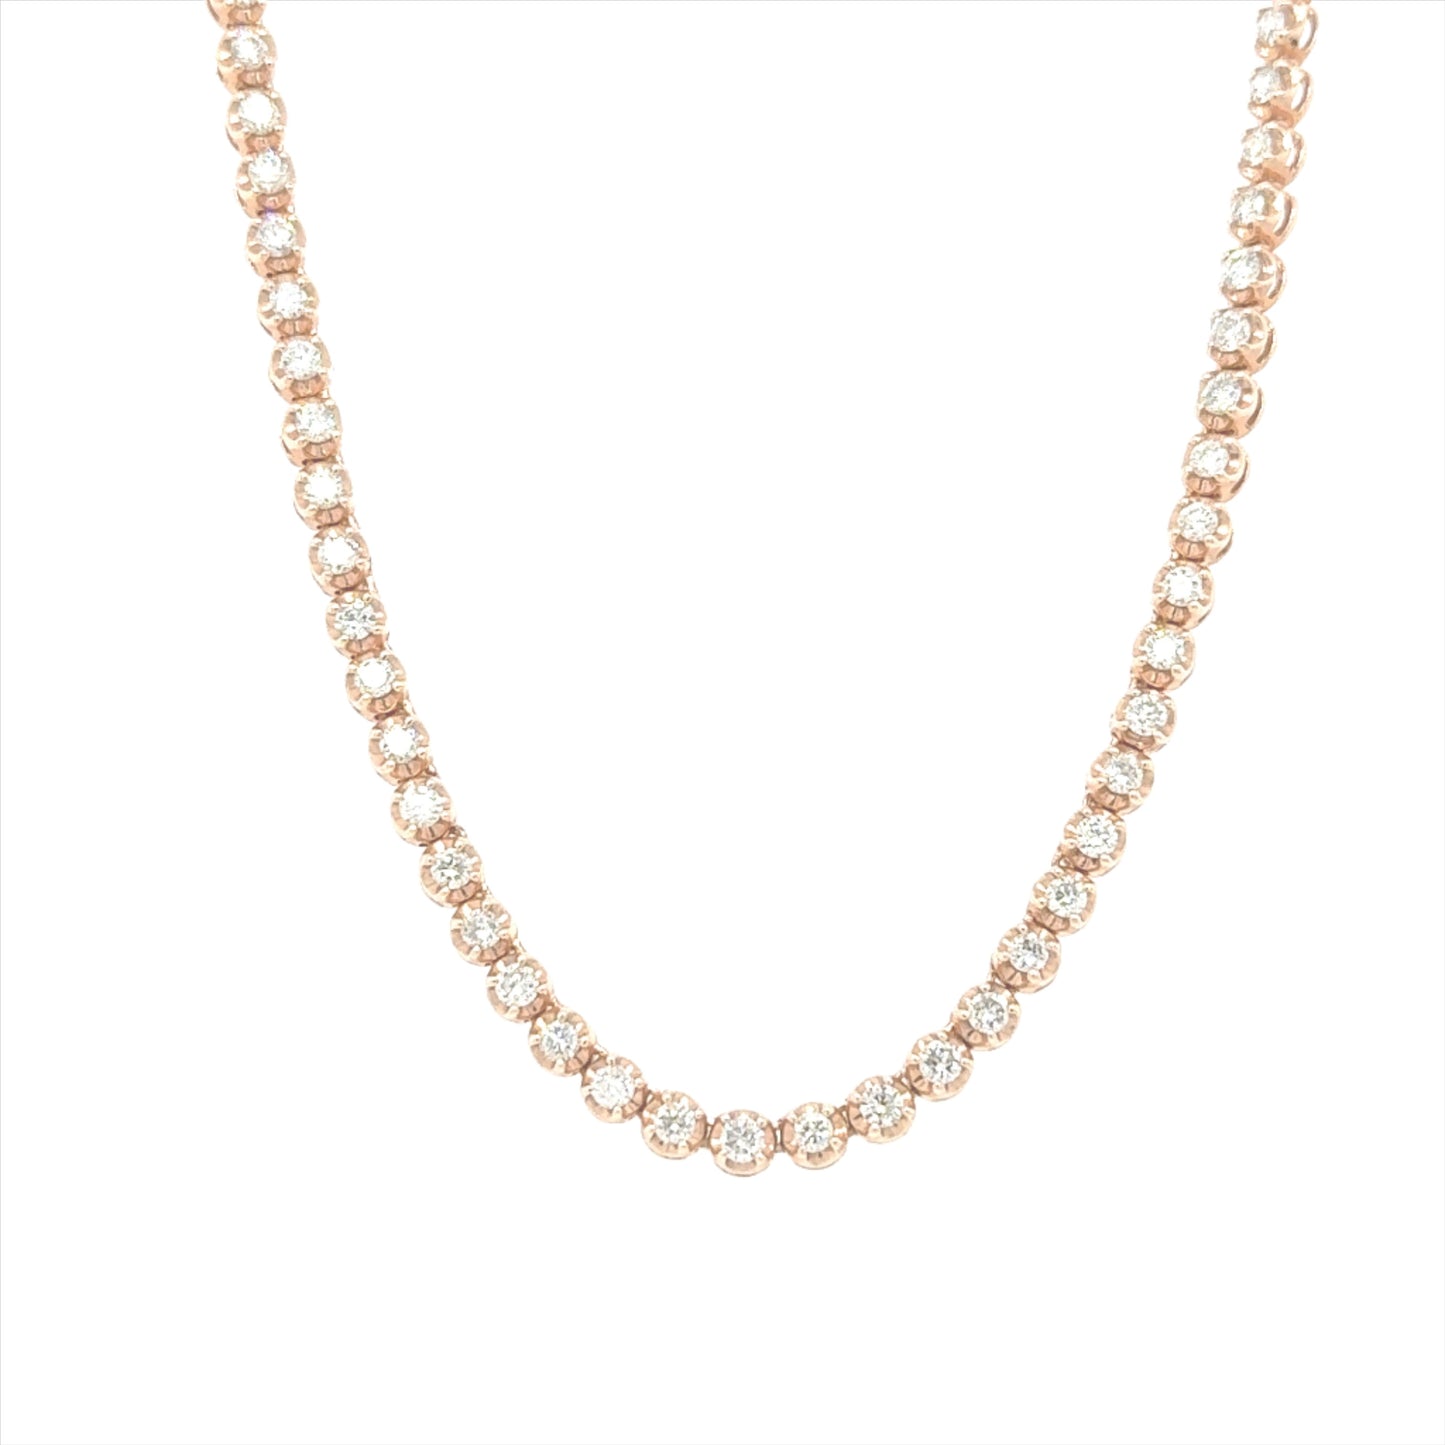 14K rose gold tennis necklace featuring 4.98 carats of VS-SI clarity, H color diamonds.